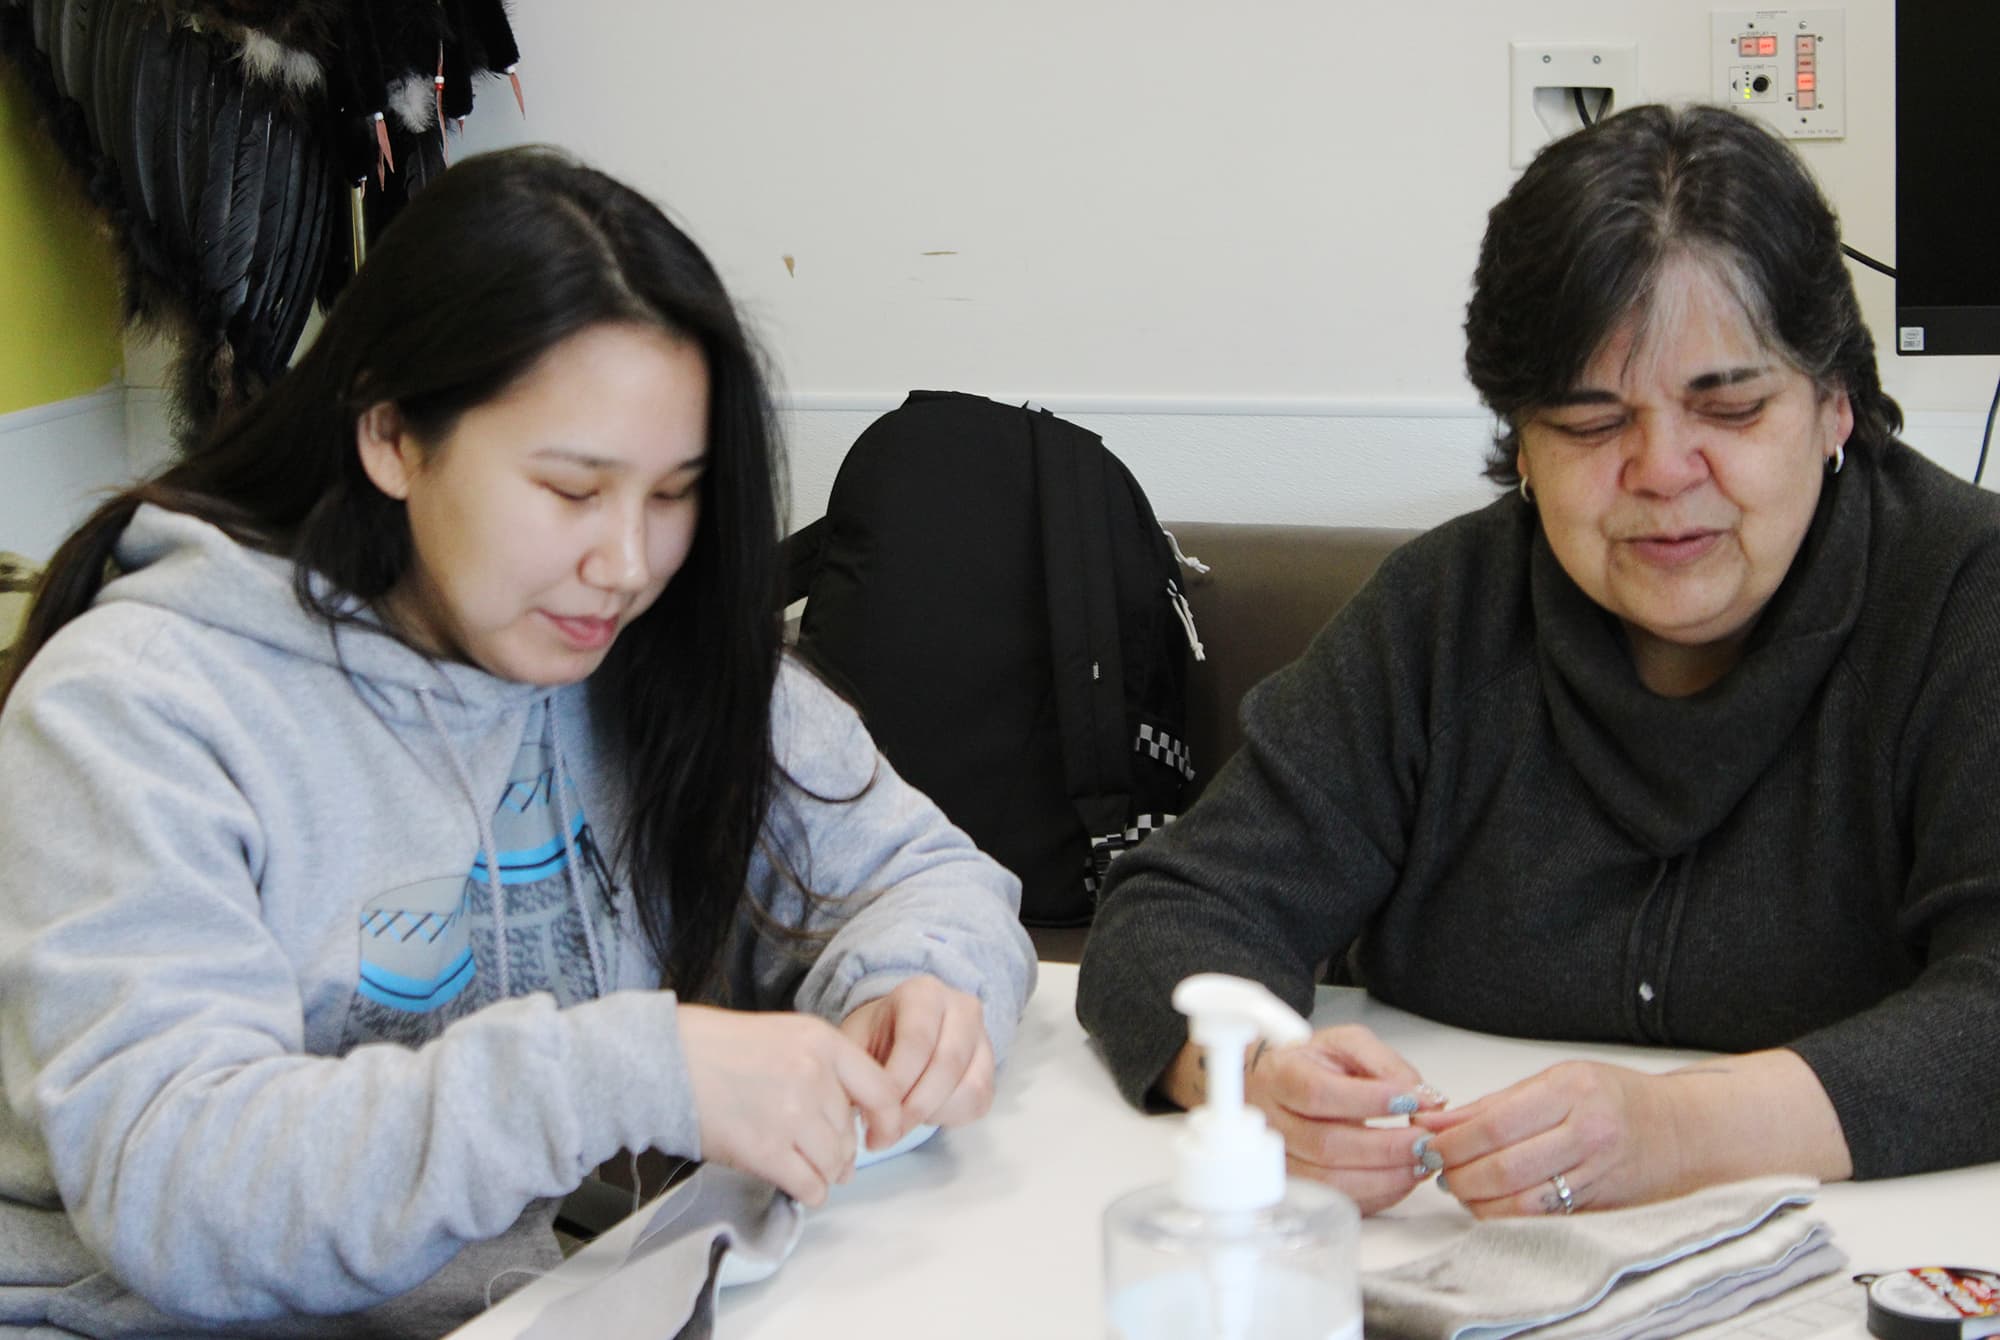 Trudy Metcalfe-Coe (right) helps a student with a seal skin headband.